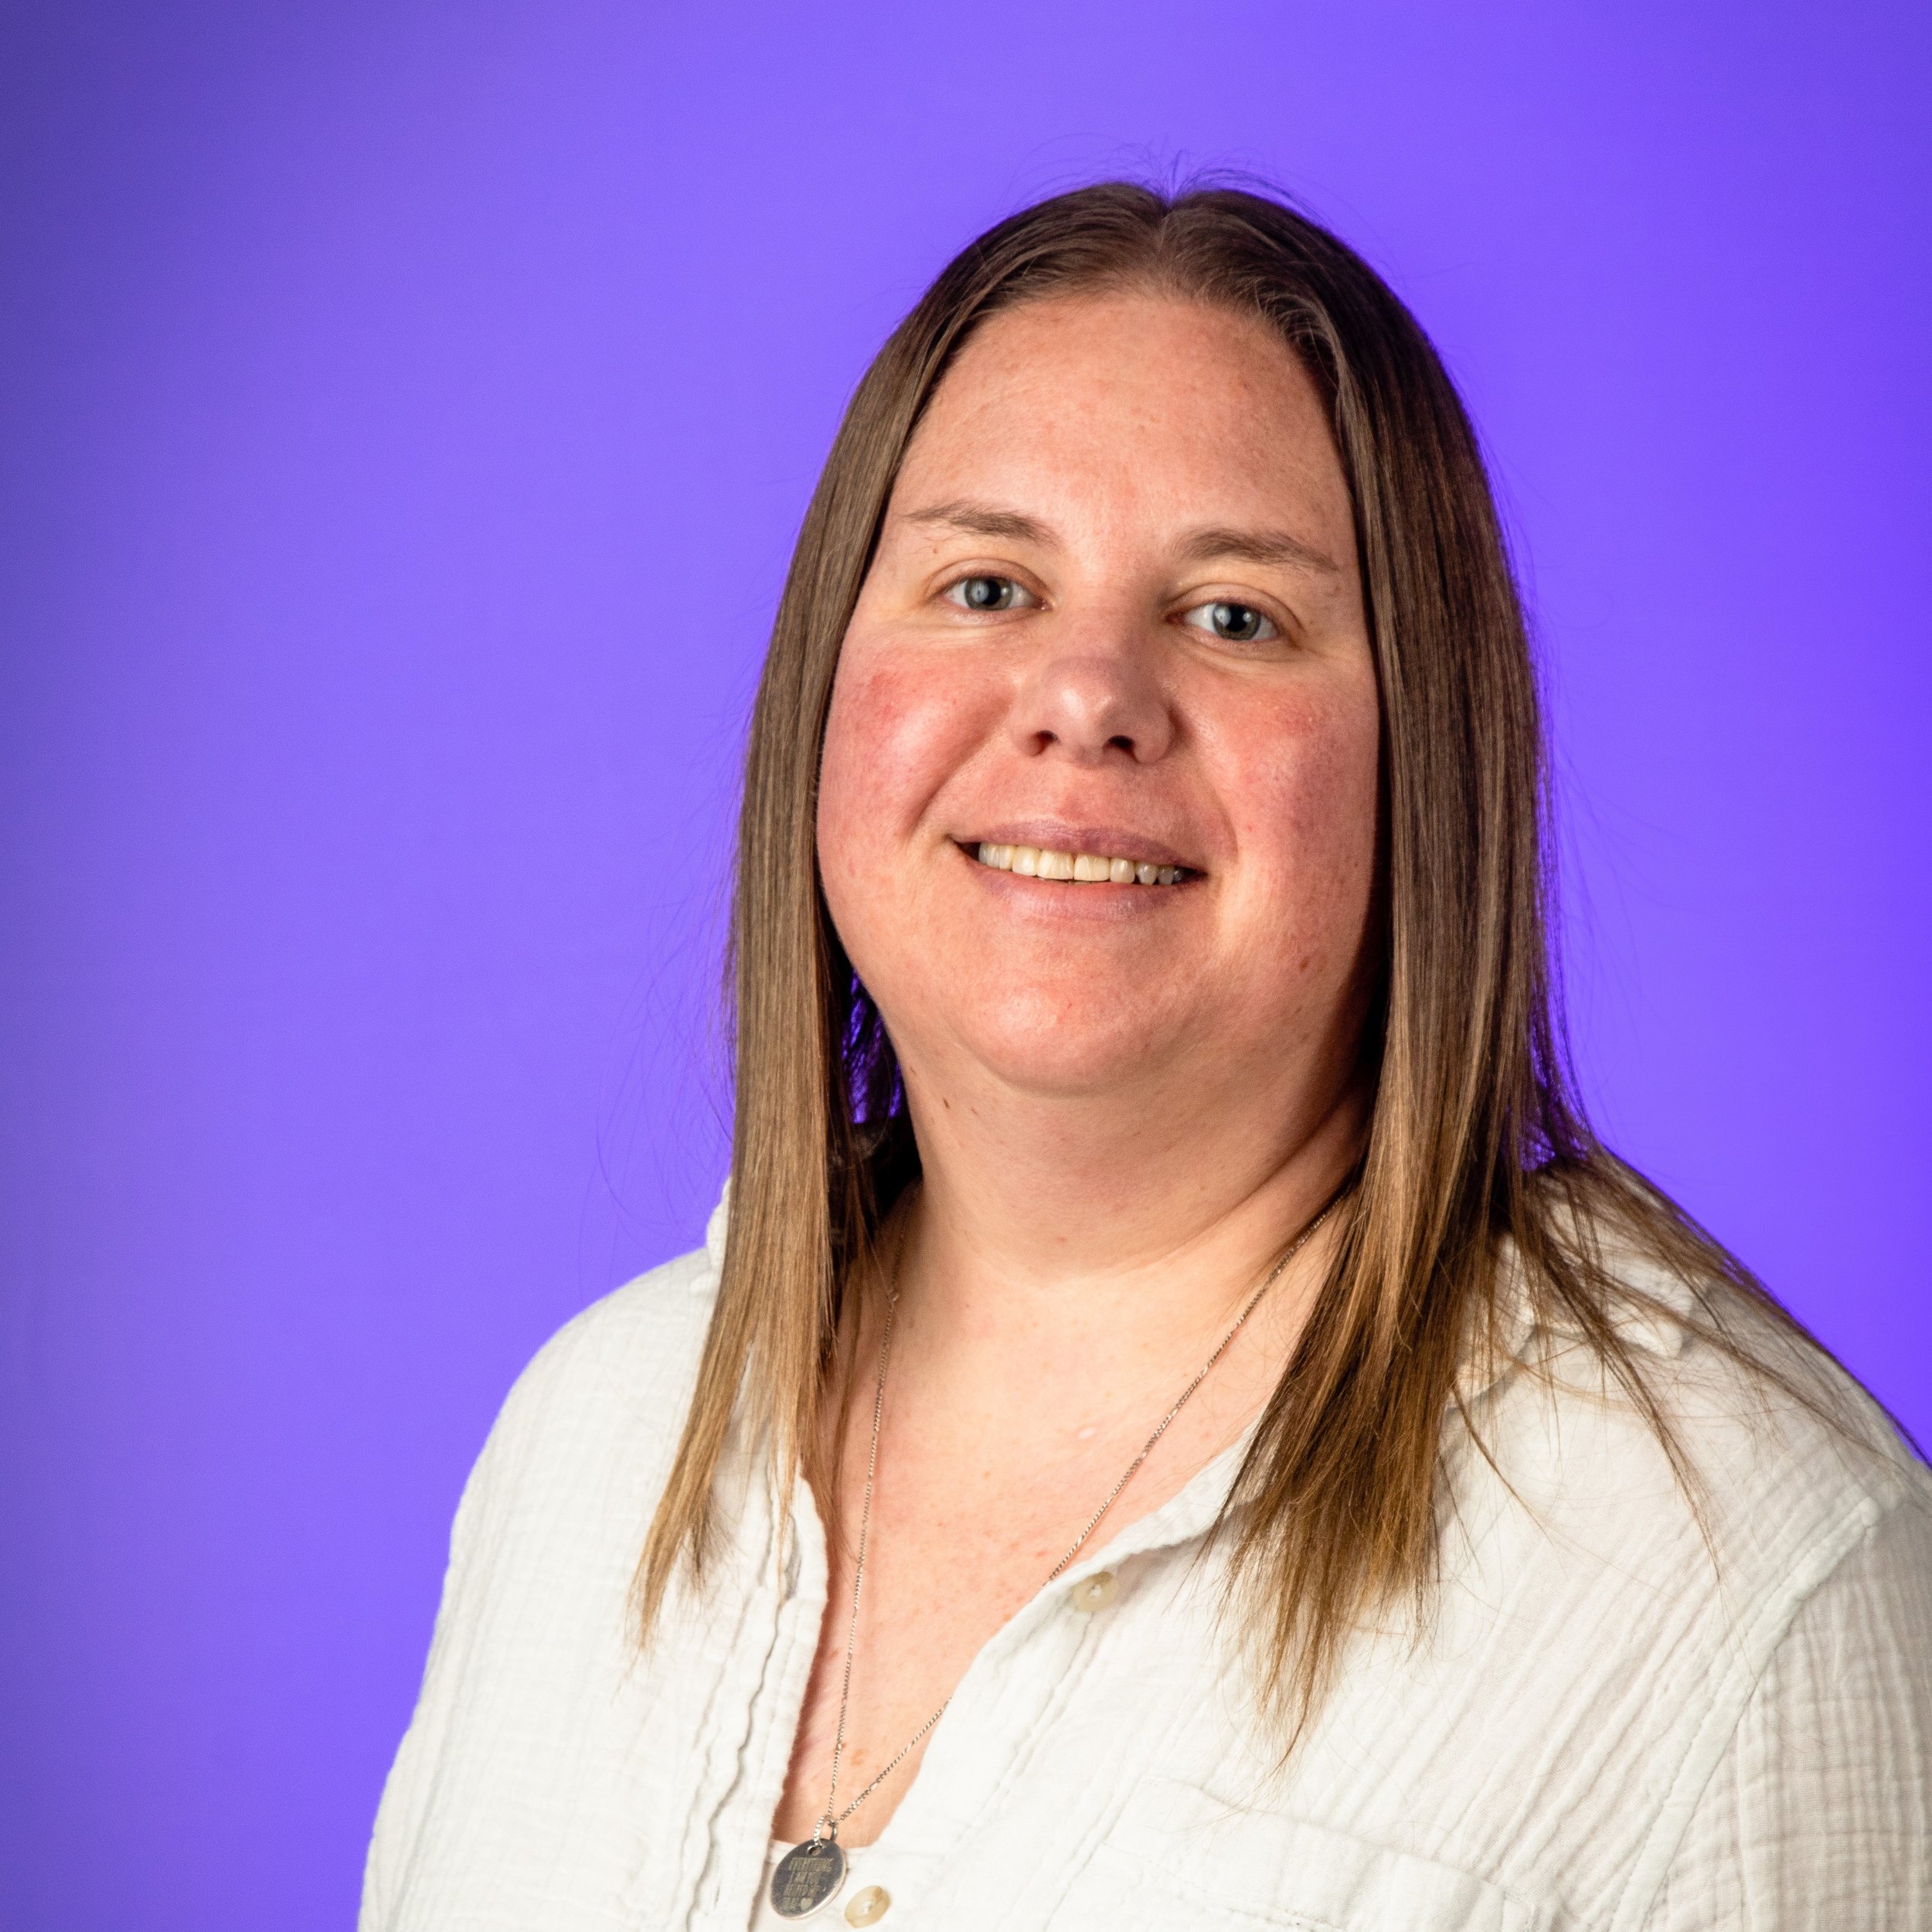   Amy Ray,  BS, NRCMA, CCHP     Practice Manager   she/her   Read More →  